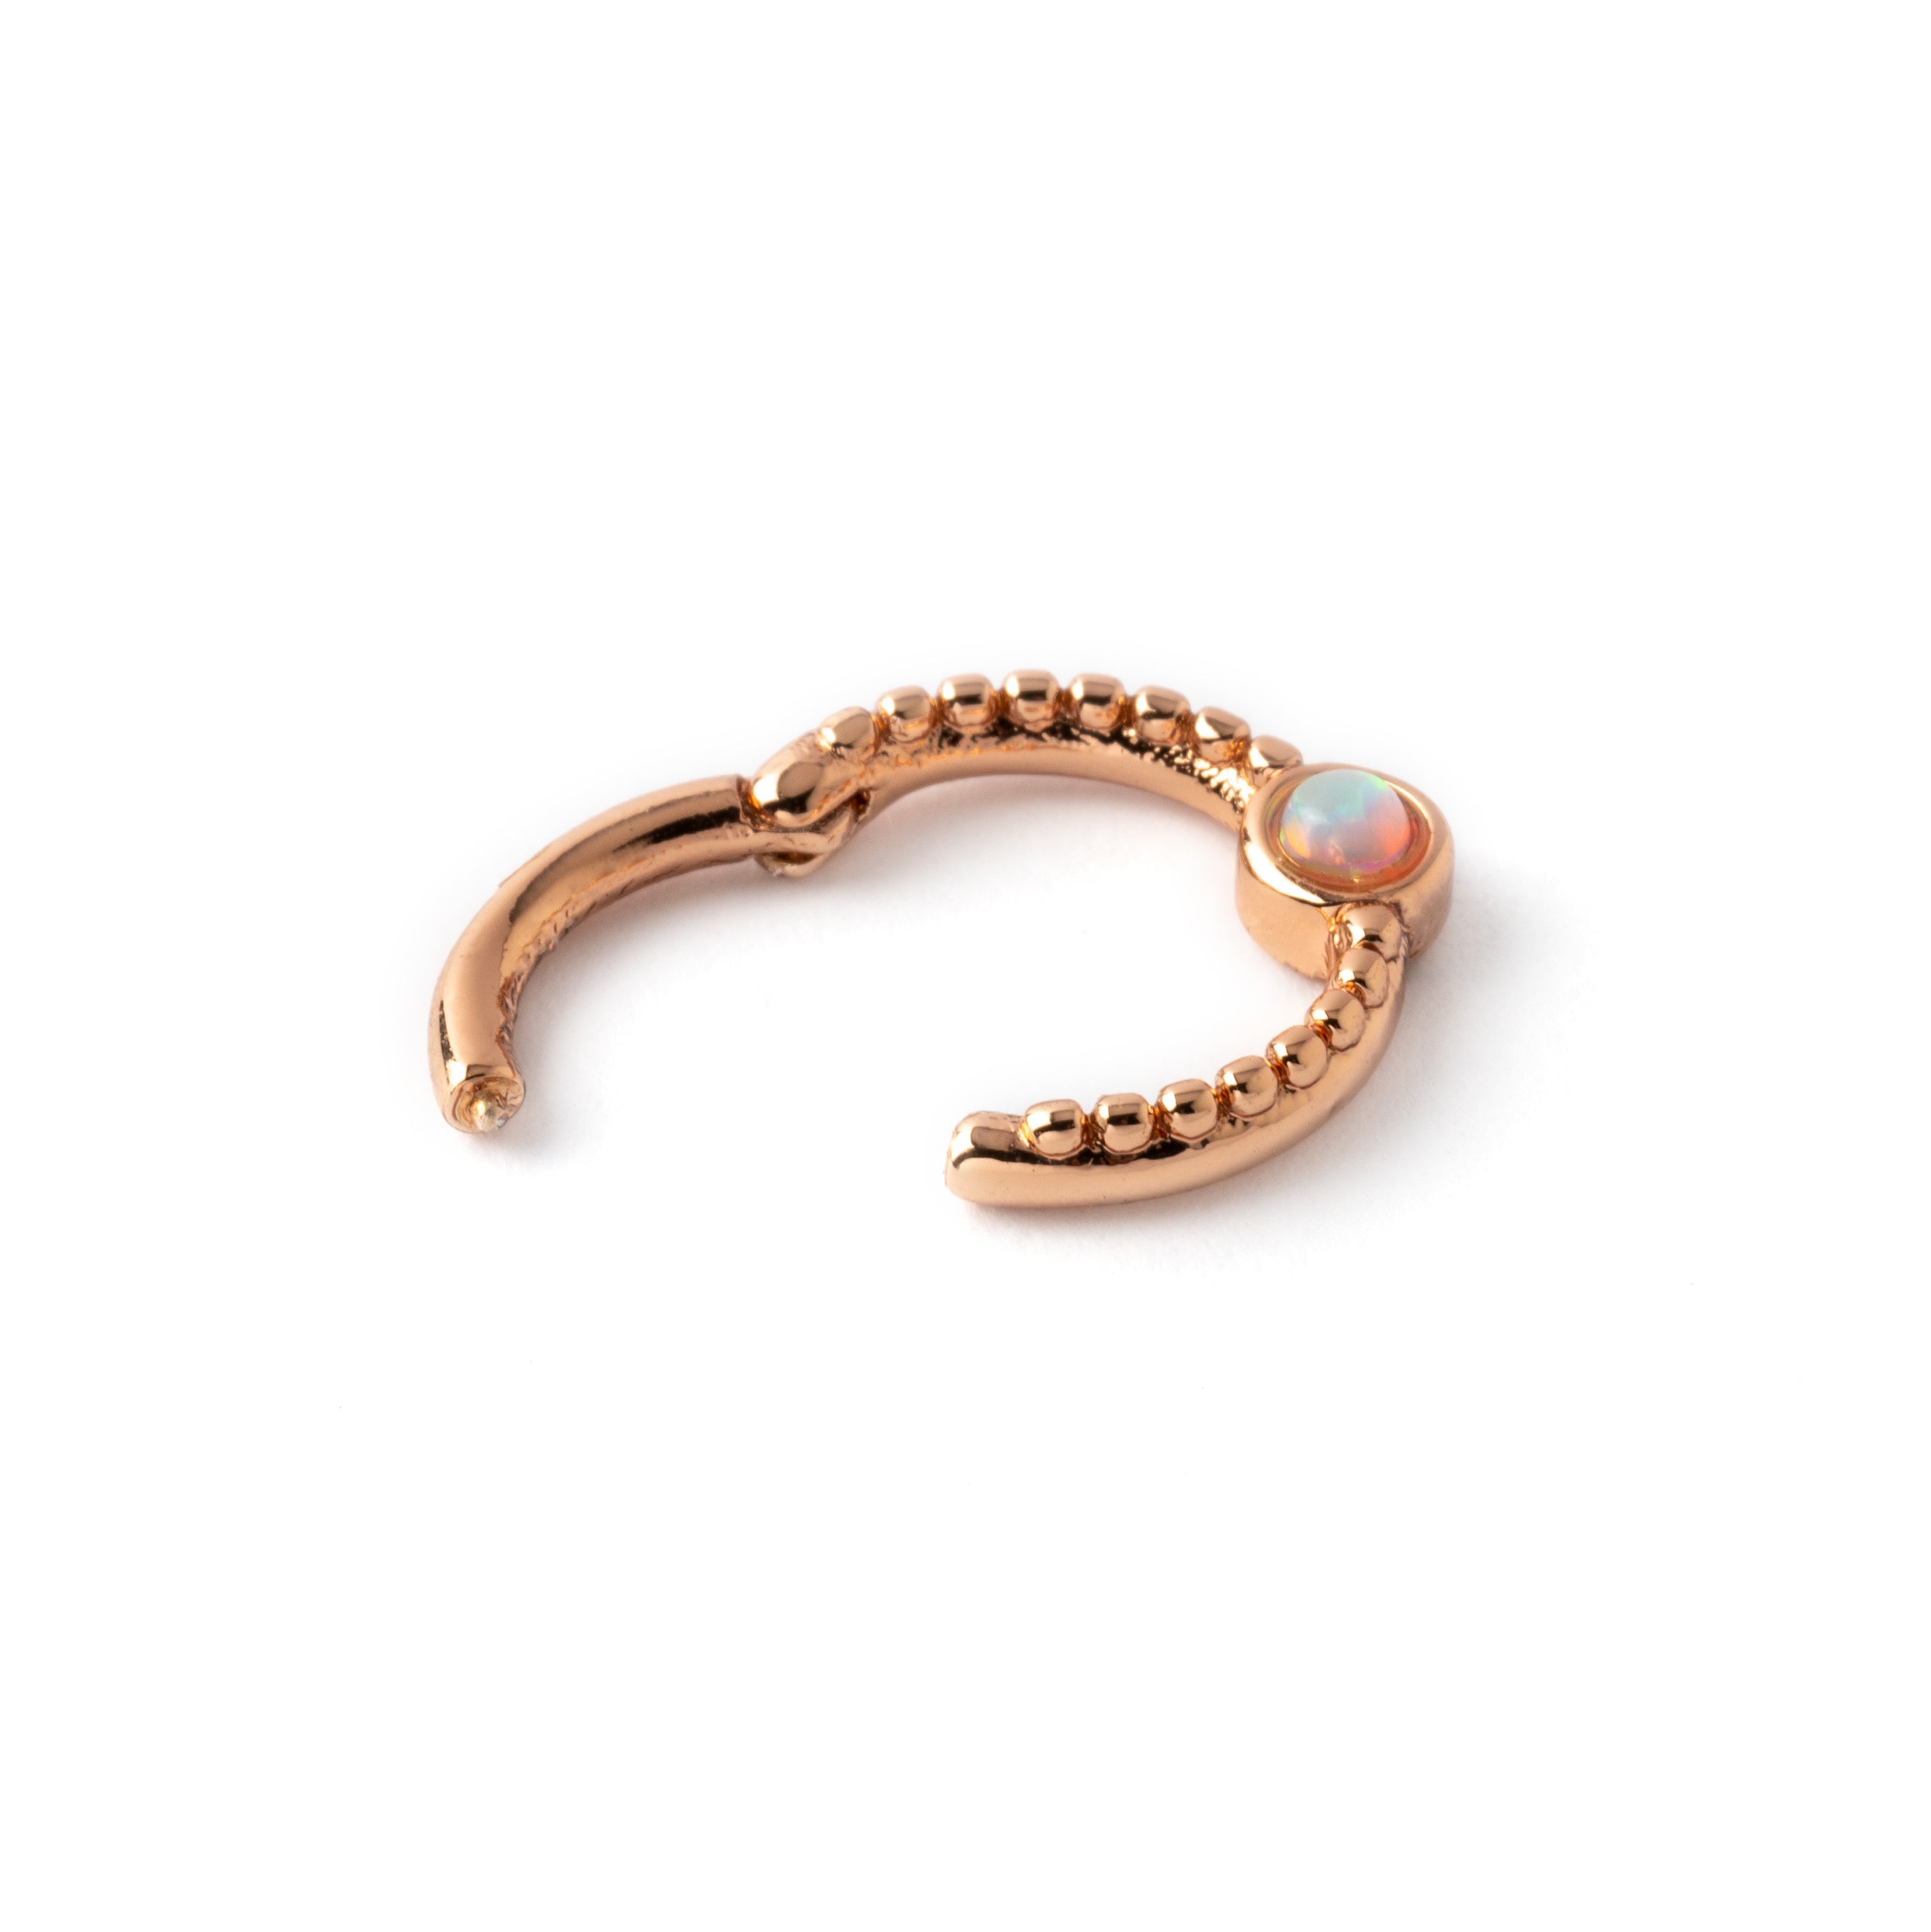 Dayaa rose gold surgical steel septum clicker with white opal closure view